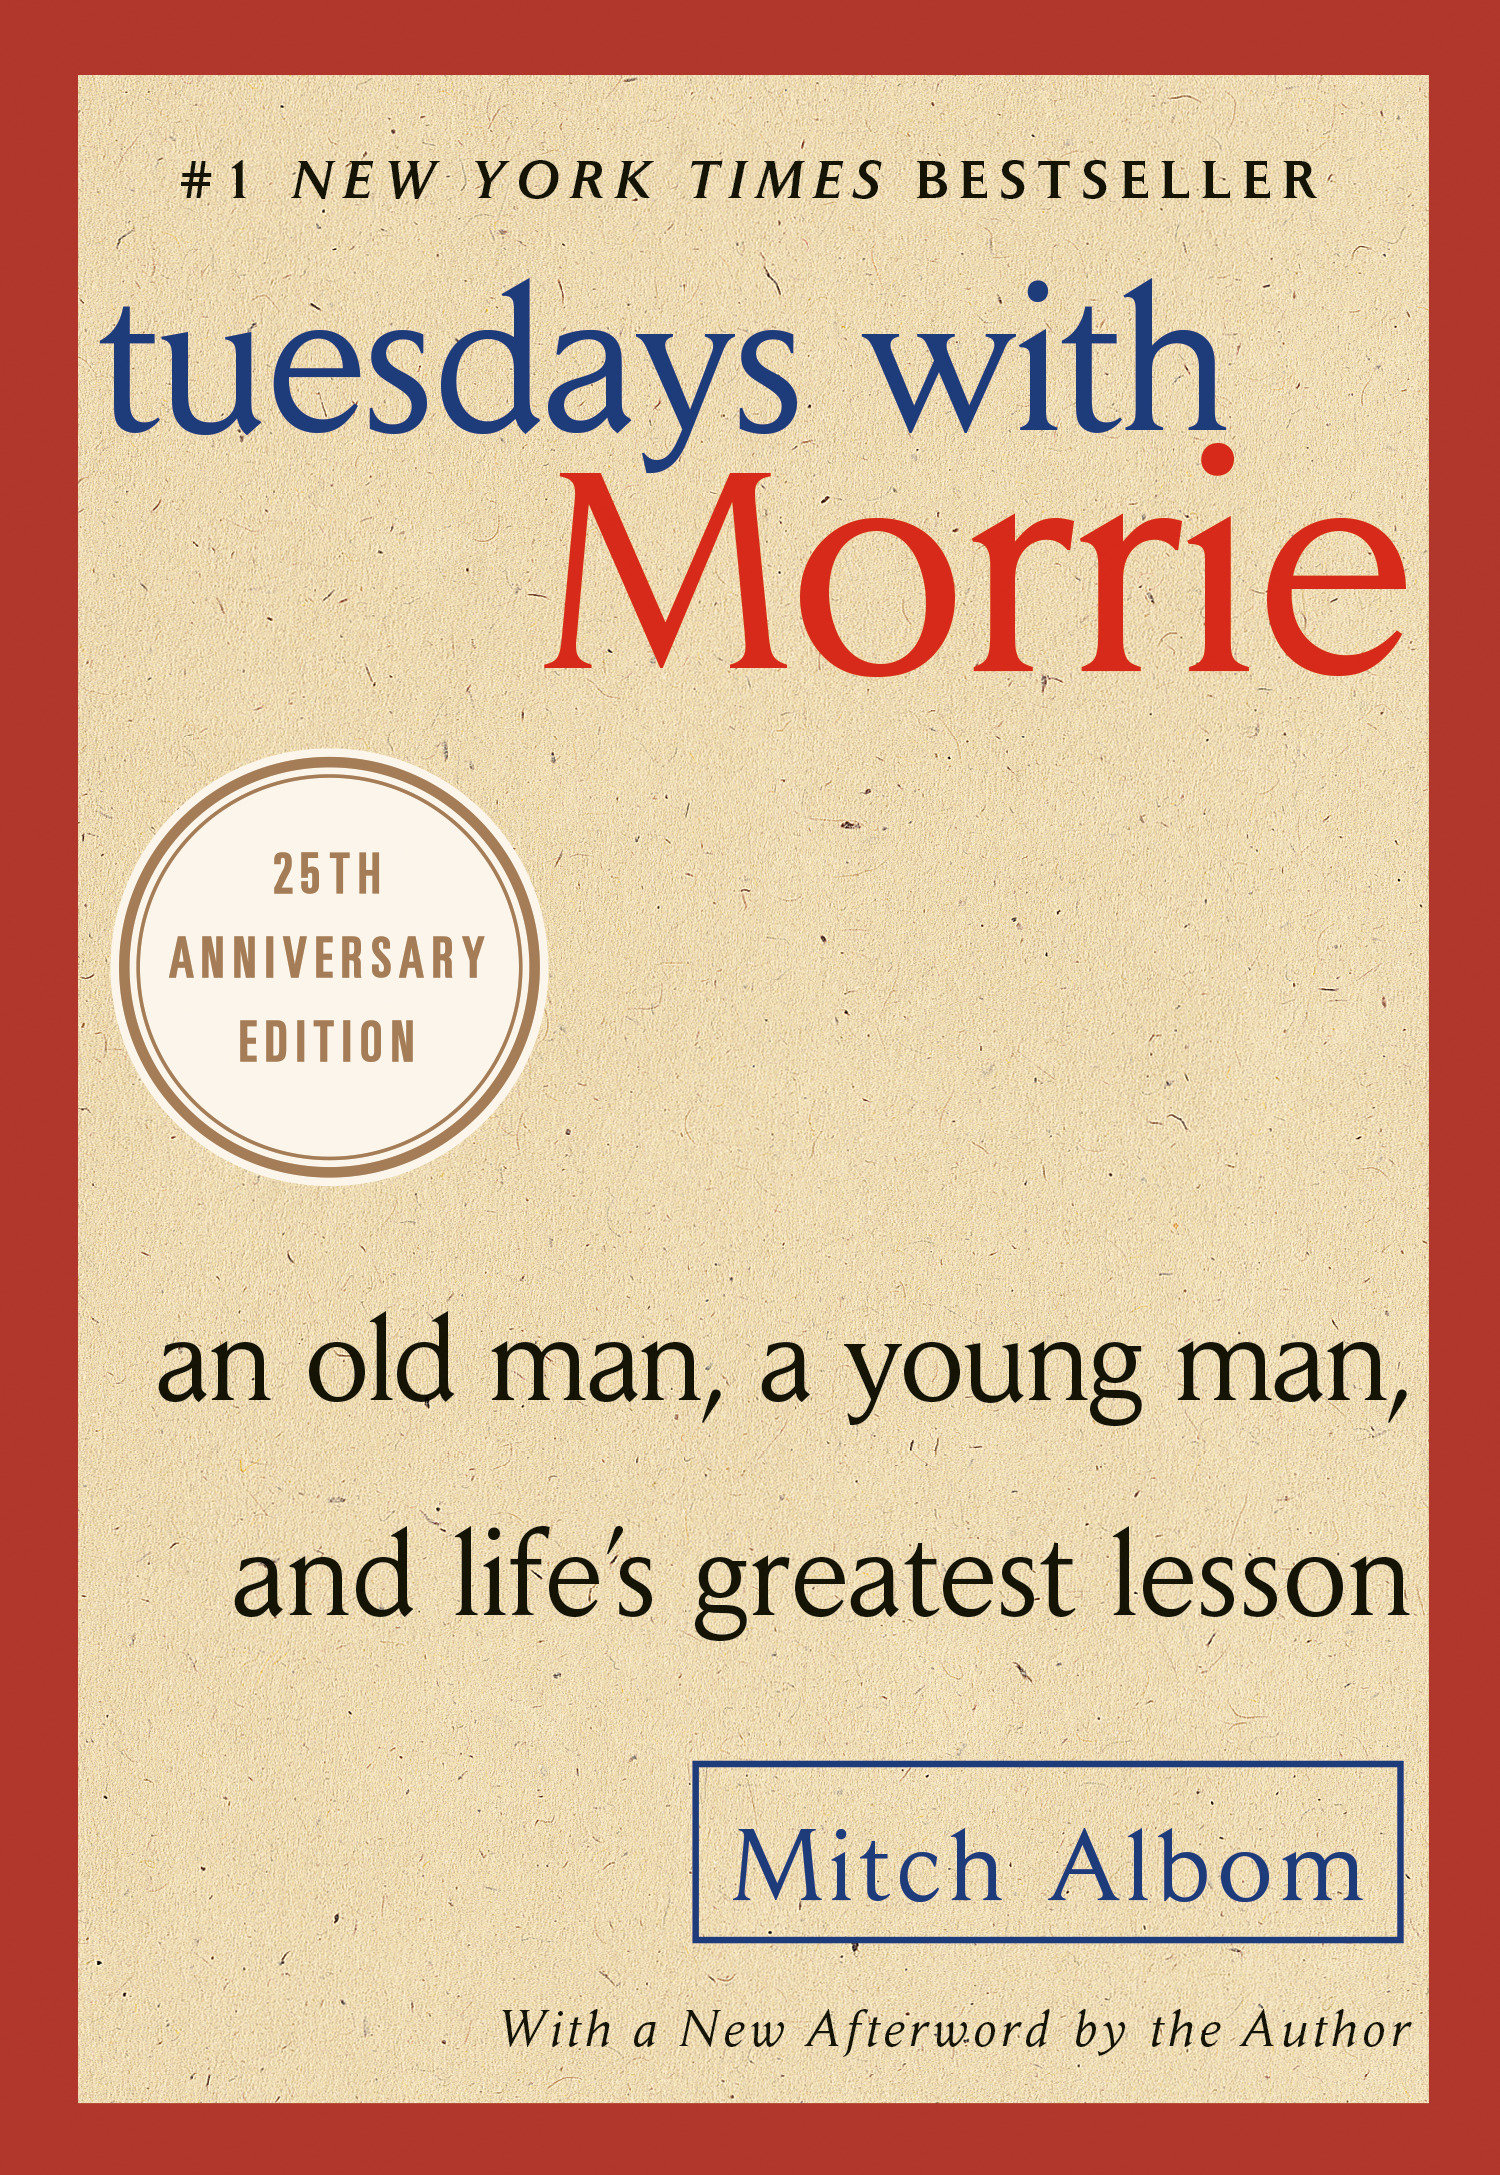 Image de couverture de Tuesdays with Morrie [electronic resource] : An Old Man, a Young Man, and Life's Greatest Lesson, 25th Anniversary Edition